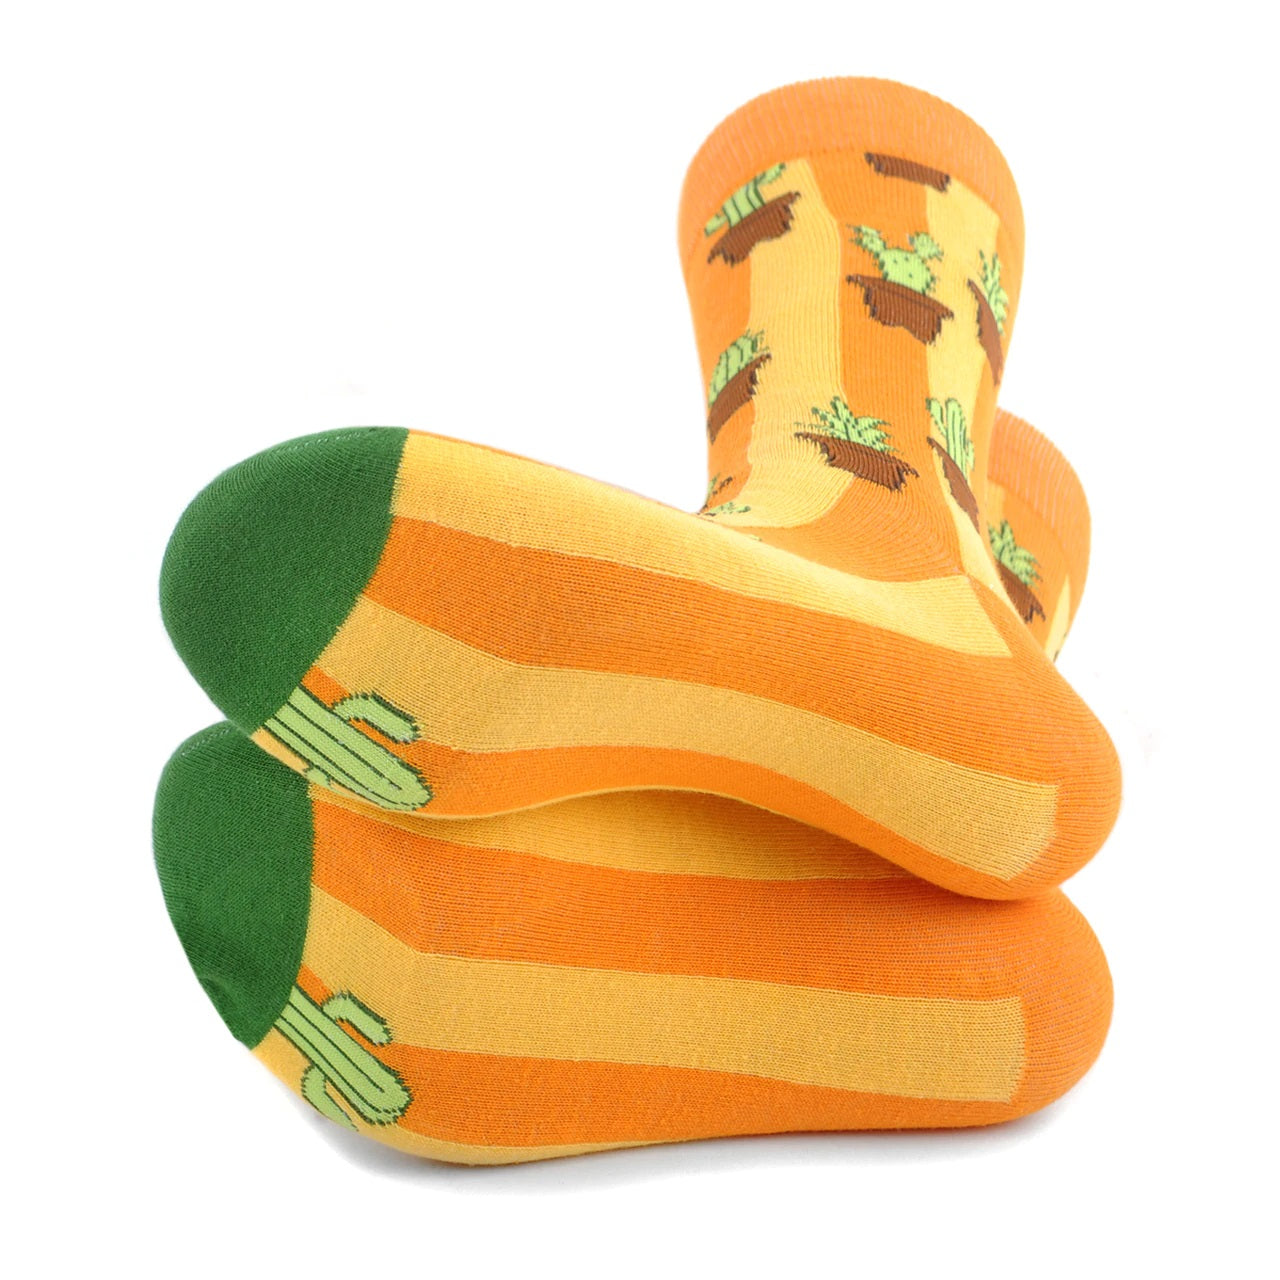 MashasCorner.com   Men's Cactus Novelty Socks  Add some fun to your outfit with our Novelty Socks. These socks are perfect for when you have to maintain being a professional but still have that burning desire to be fun & silly! These socks are super soft & comfy.  70% Cotton, 25% Polyester, 5% spandex Sock size: 10-13 Shoe size: 6-12.5 Machine wash, tumble dry low Imported